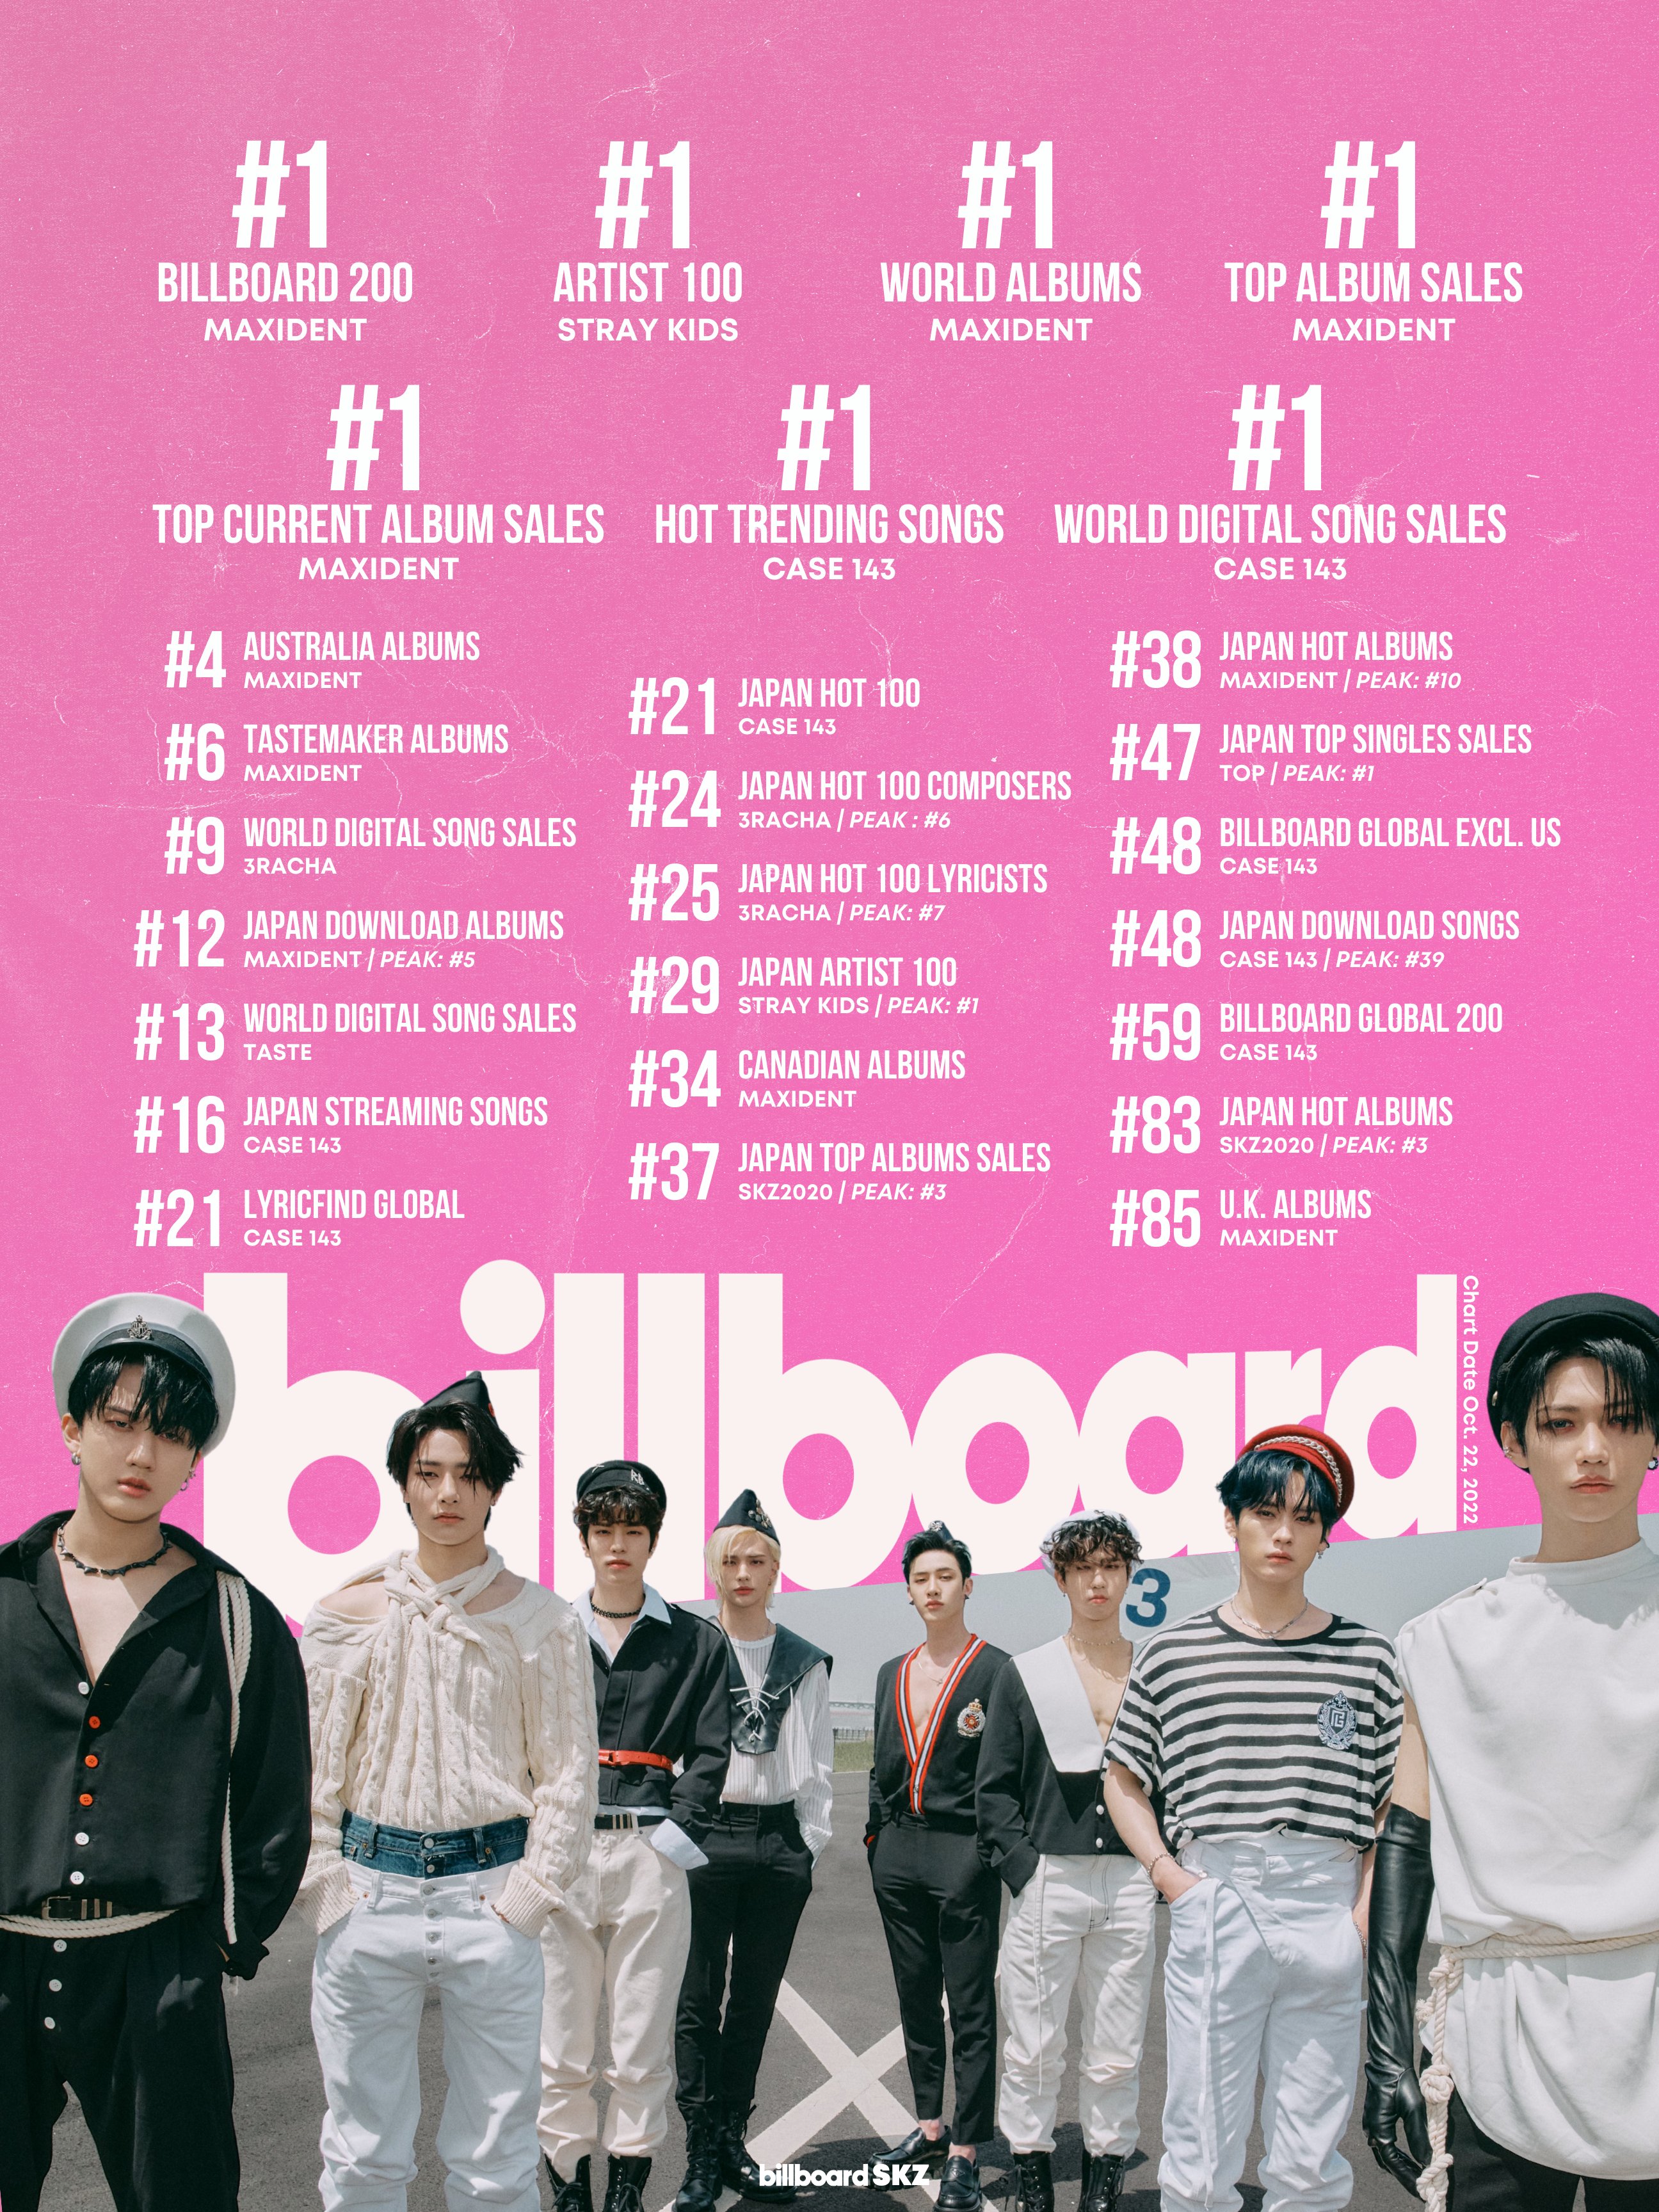 Stray Kids' “ROCK-STAR” Reclaims No. 1 On Billboard's World Albums Chart  For A 3rd Week